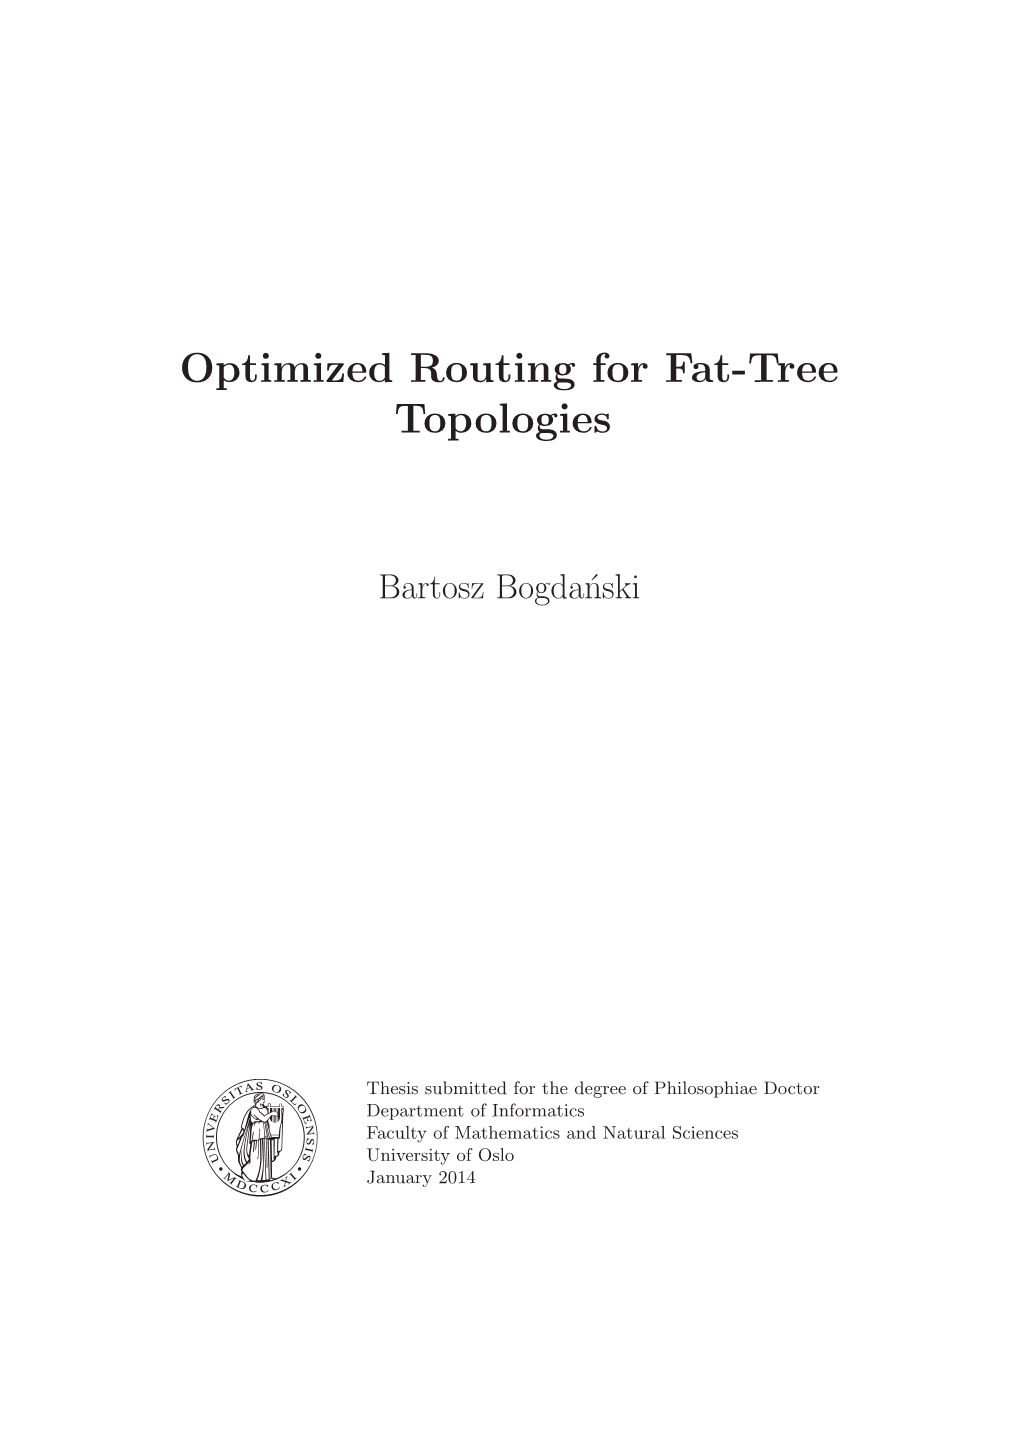 Optimized Routing for Fat-Tree Topologies